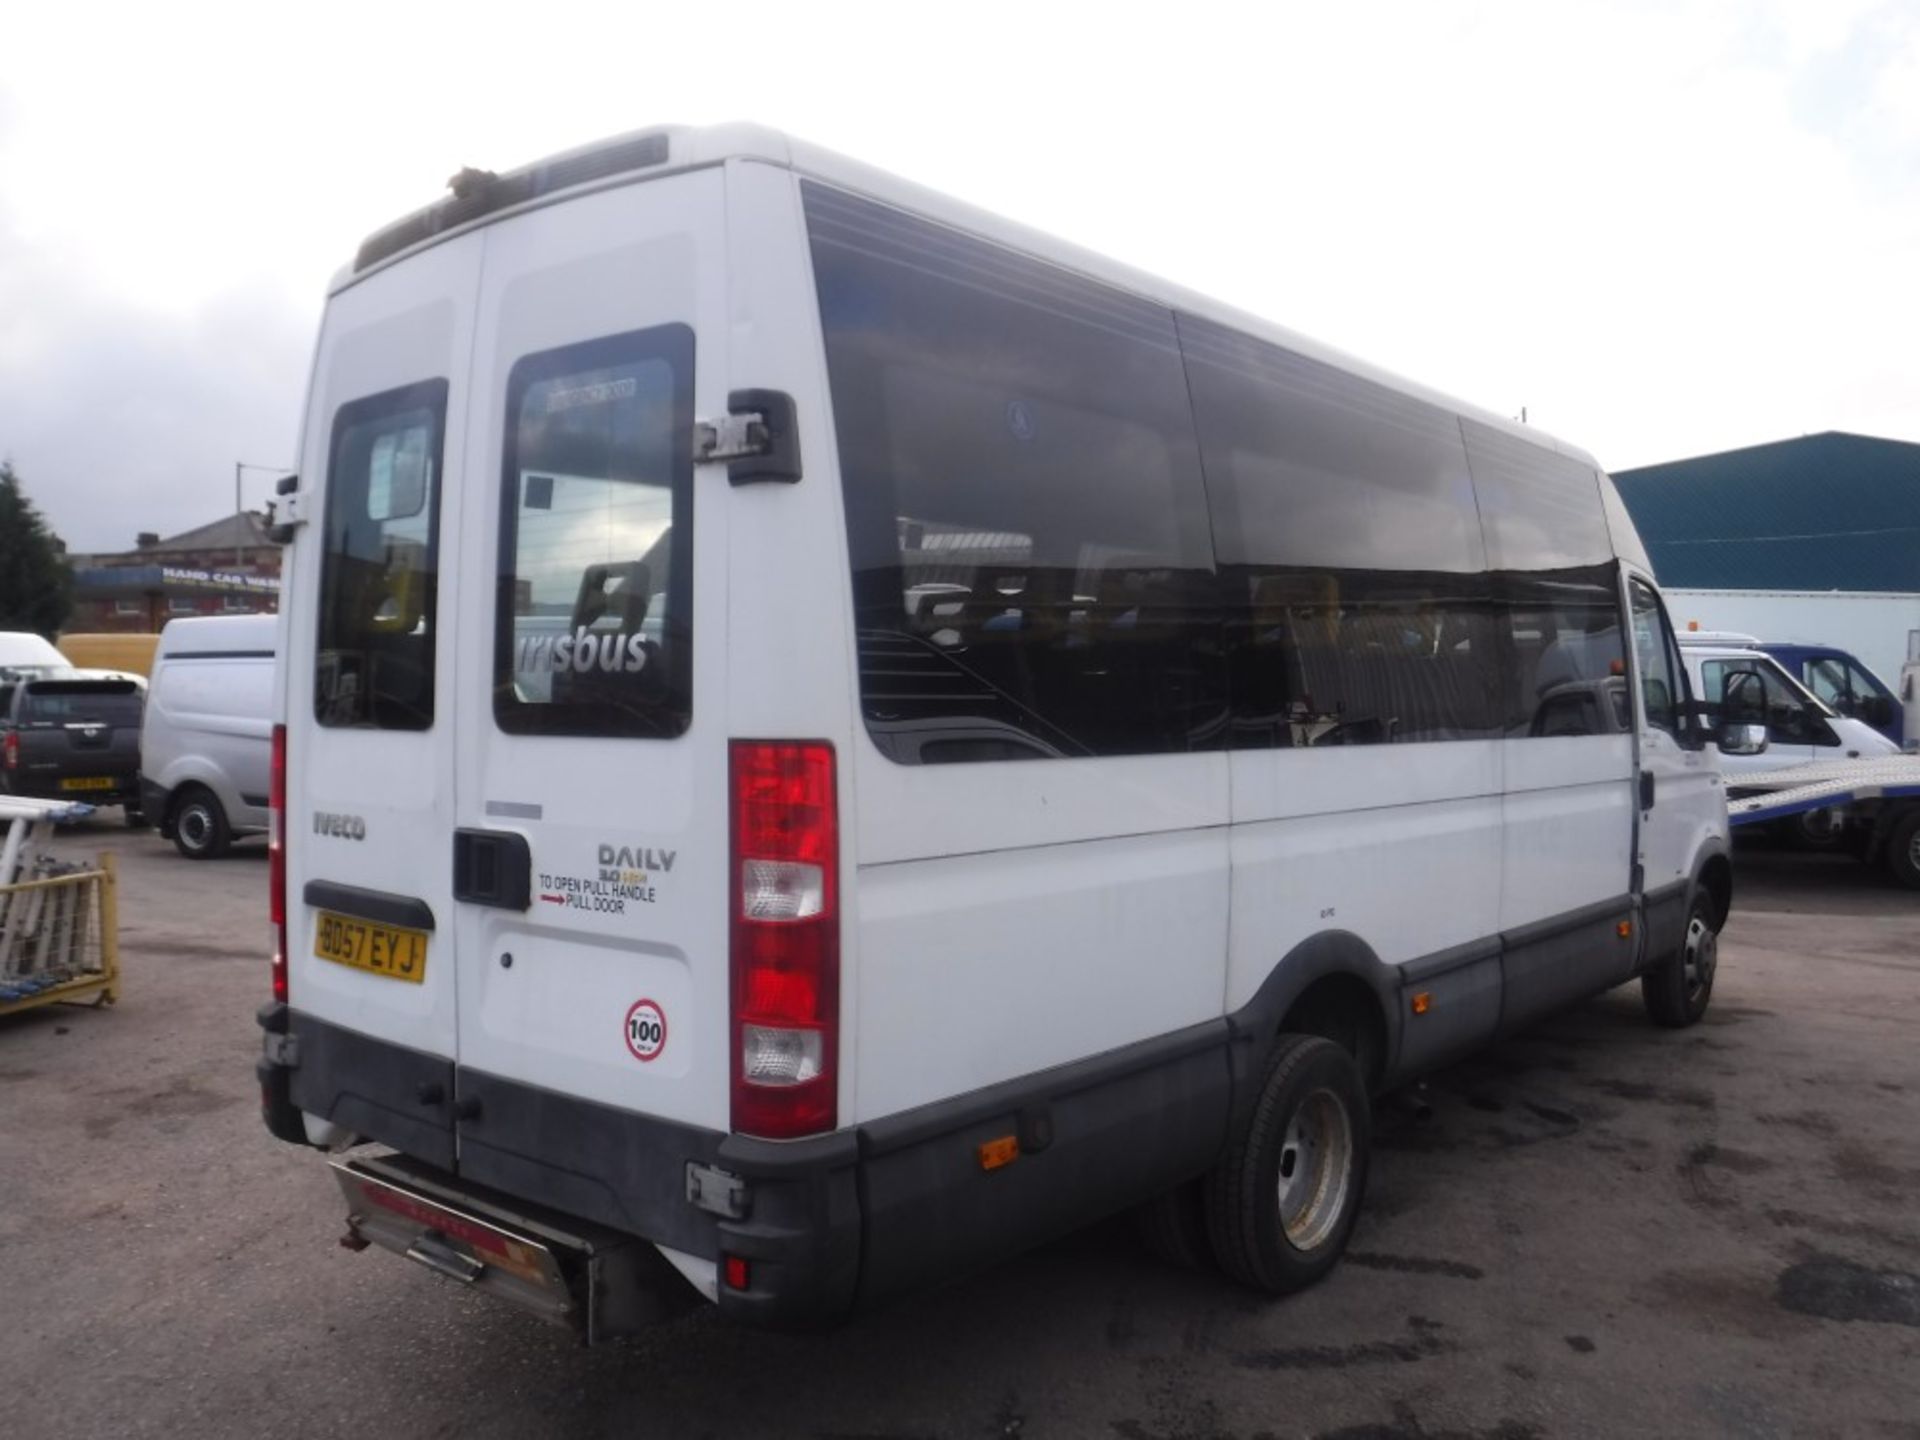 57 reg IVECO DAILY IRIS 14 SEAT MINIBUS, 1ST REG 12/07, 292132M NOT WARRANTED, V5 HERE, 1 FORMER - Image 4 of 6